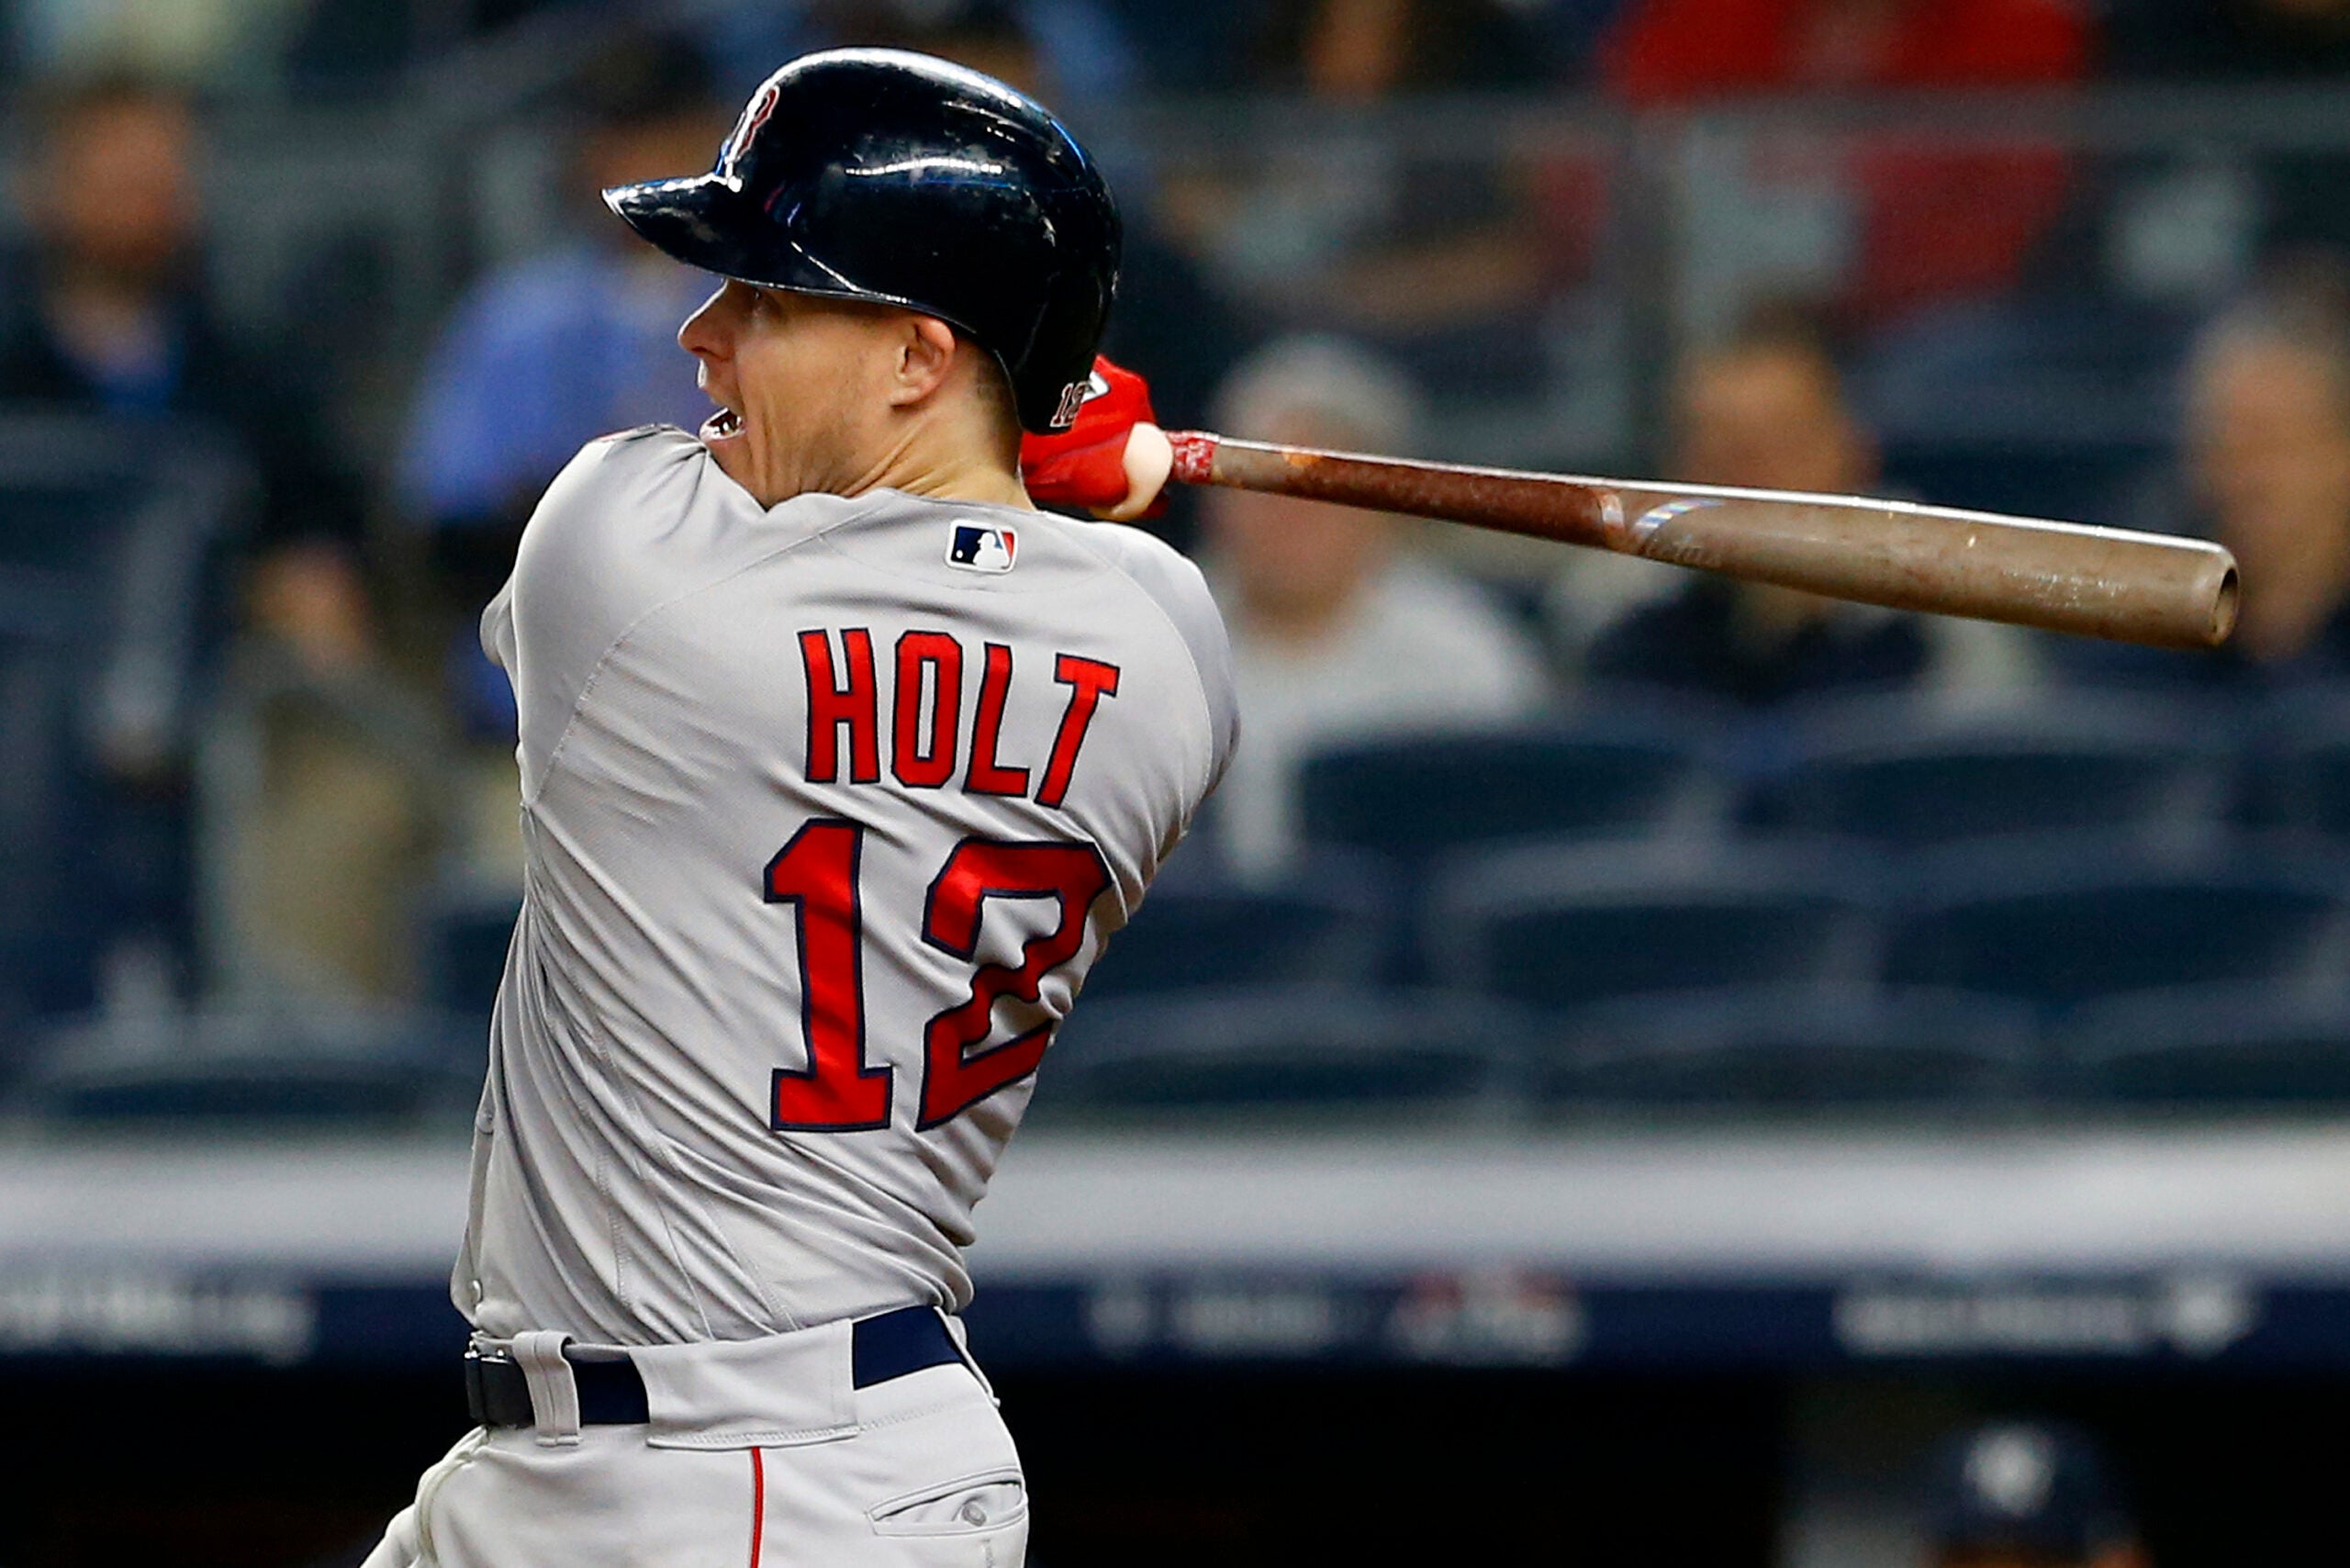 Red Sox rout Yankees 16-1 to take series lead, Brock Holt hits for